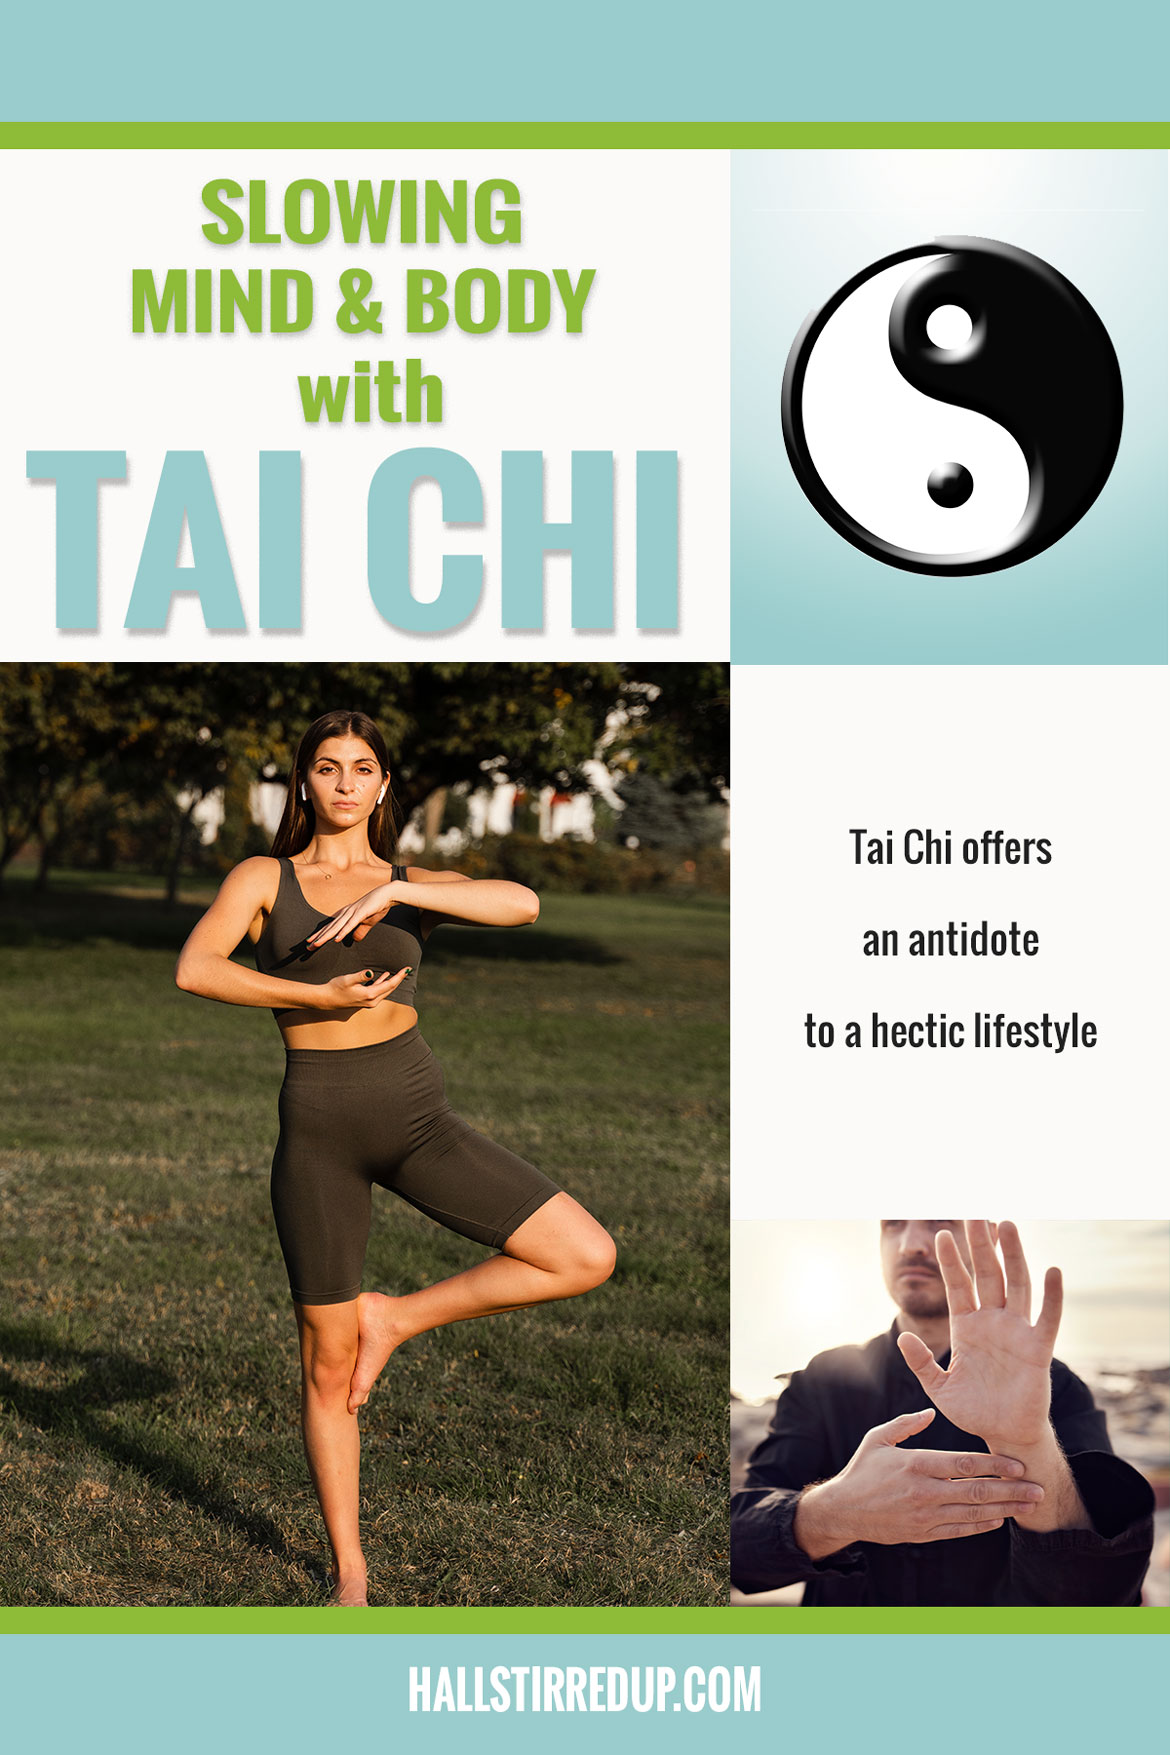 Slowing mind and body with Tai Chi